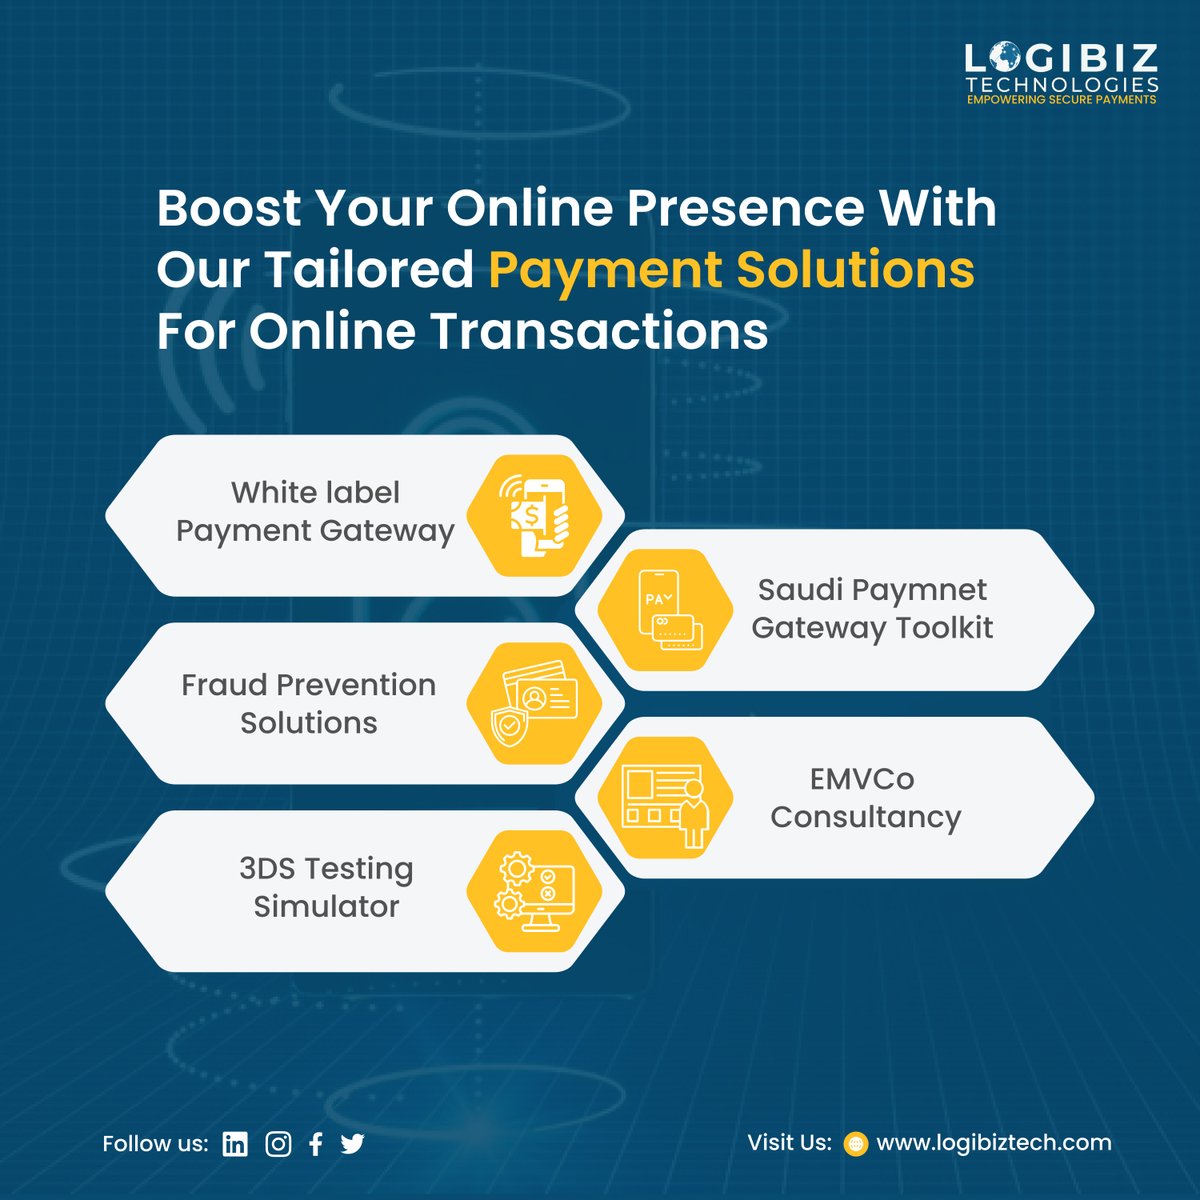 Join us at Logibiz as we begin on a journey to transform the way we shop online. Our Solutions: ➊ White label Payment Gateway ➋ Fraud Prevention Solutions ➌ 3DS Testing Simulator ➍ Saudi Payment Gateway Toolkit ➎ EMVCo Consultancy #paymentgateway #emvco #testing